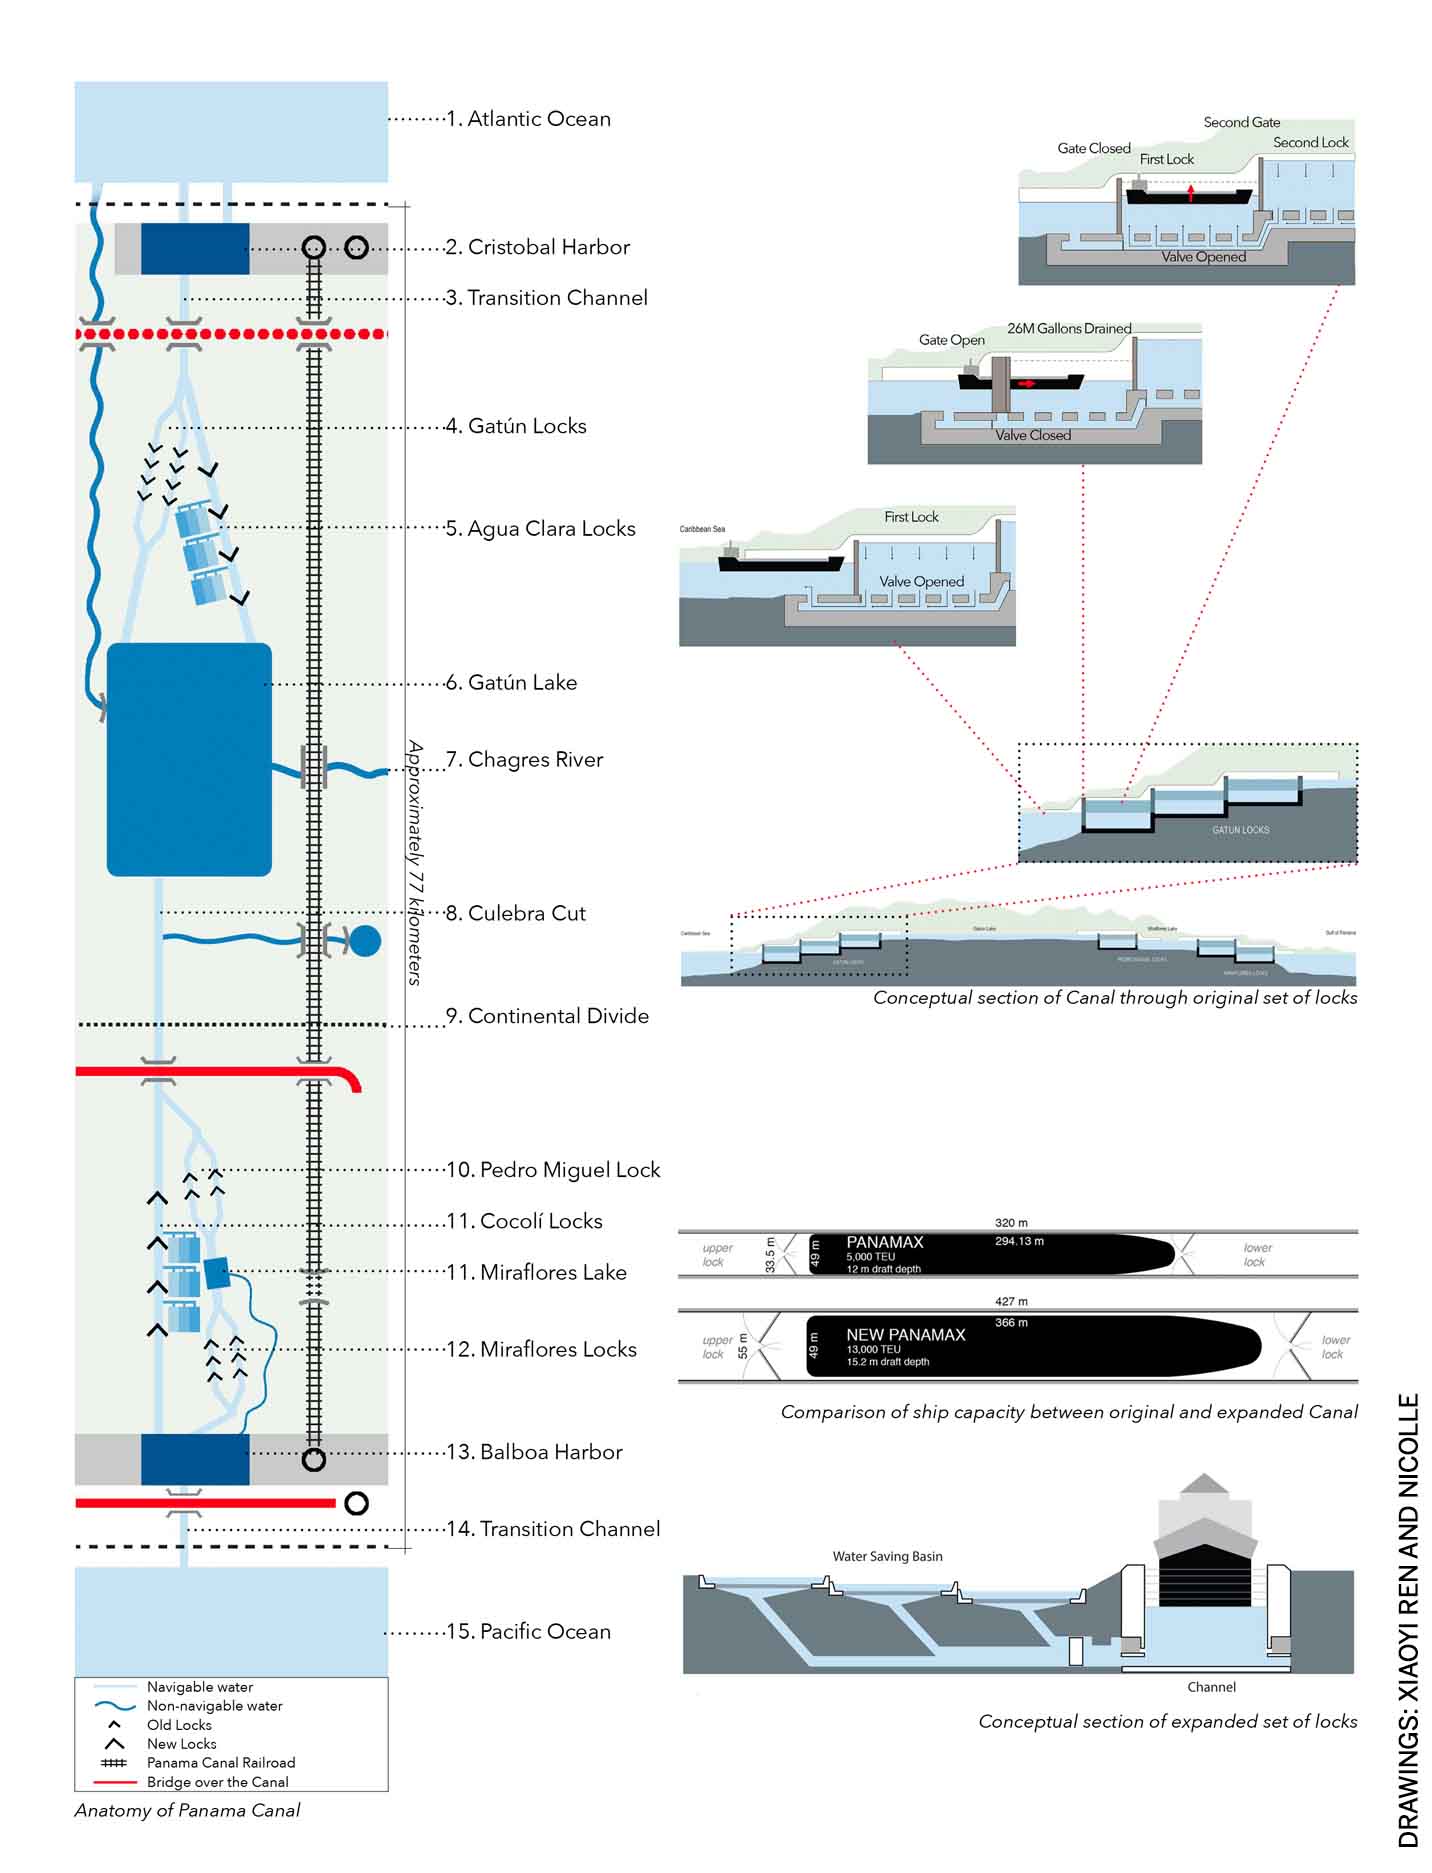 panama-canal-rereading-engineered-mega-landscape-diagrammatic-sequence-showing-raising-lowering-ship-within-schematic-section-new-expansion-locks